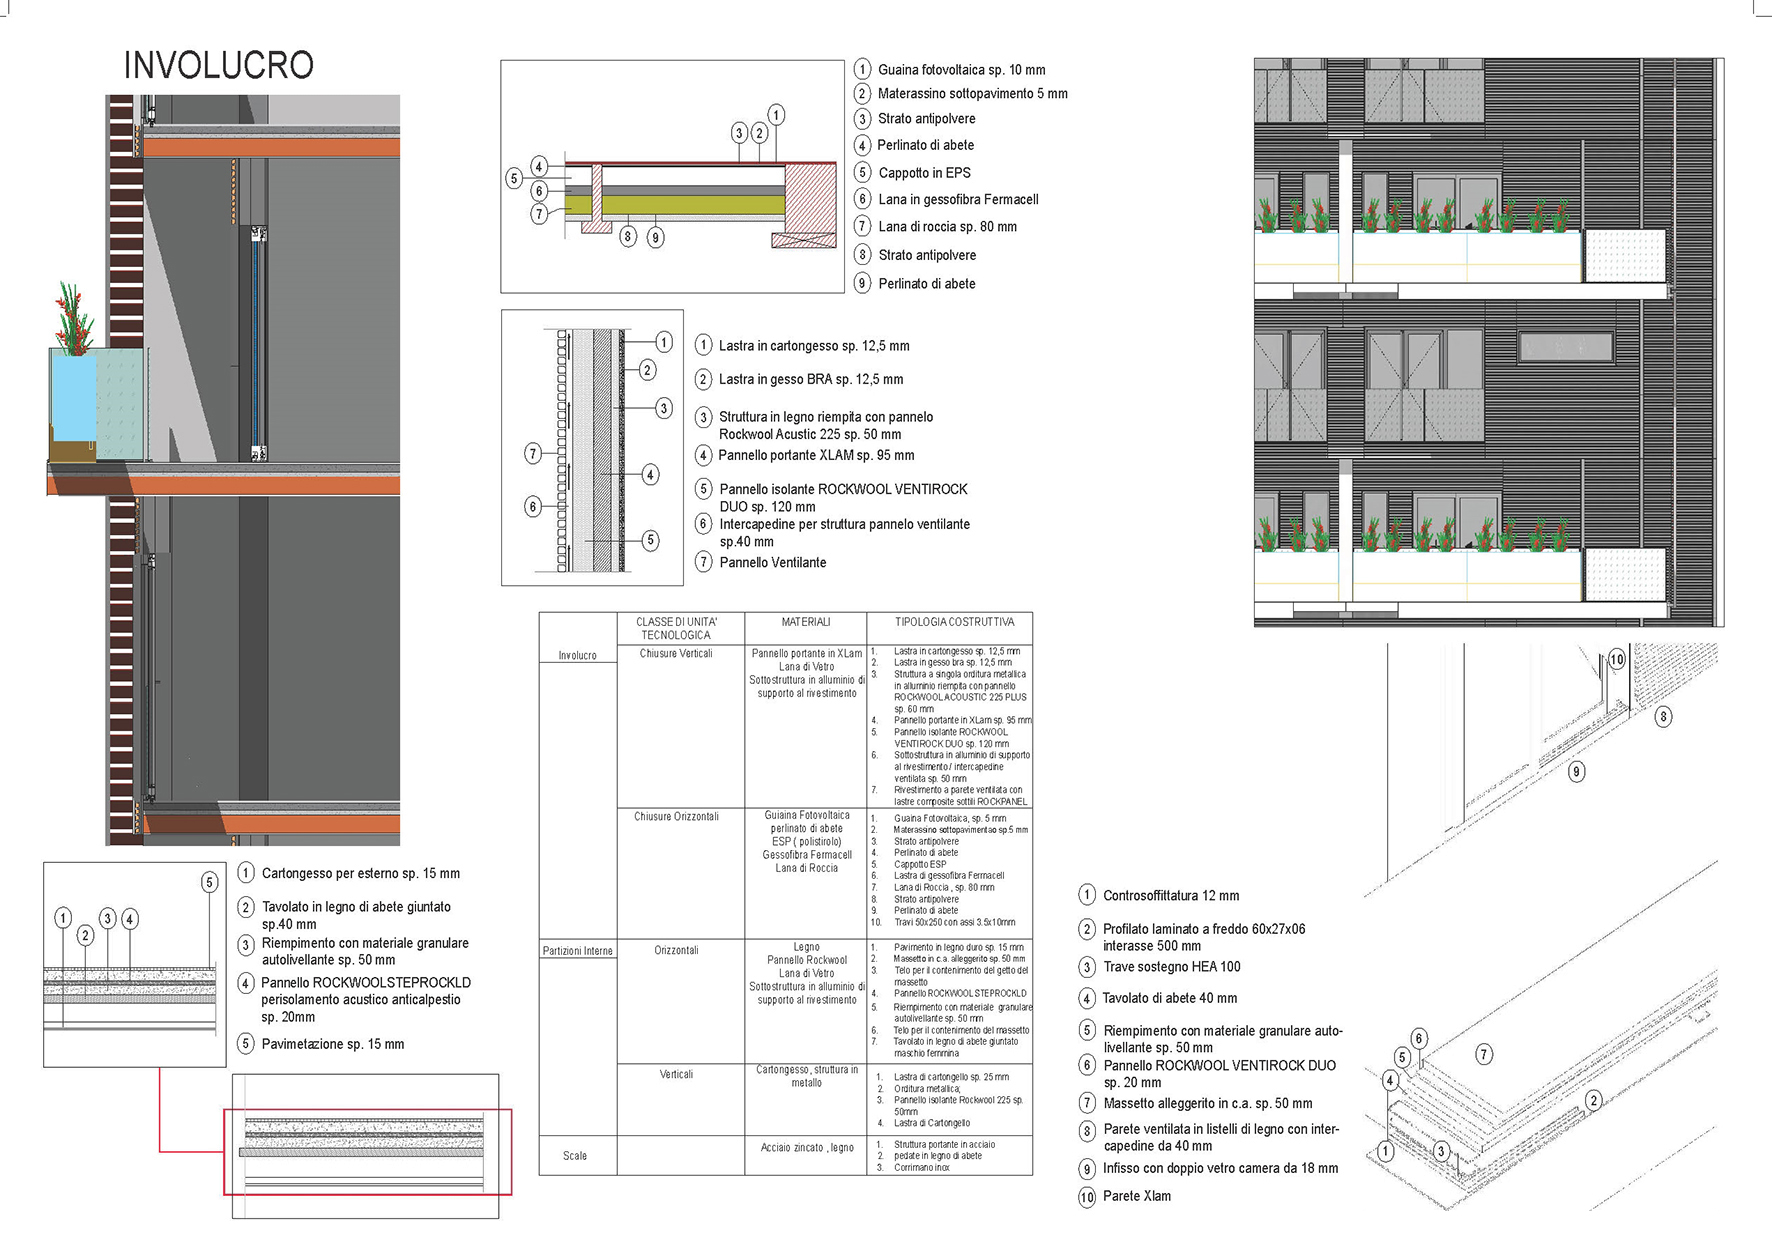 Construction of the new envelope at openings and on a blind wall, of the new floors and partitions: characterization of functional layers and materials necessary for the definition of the BIM model